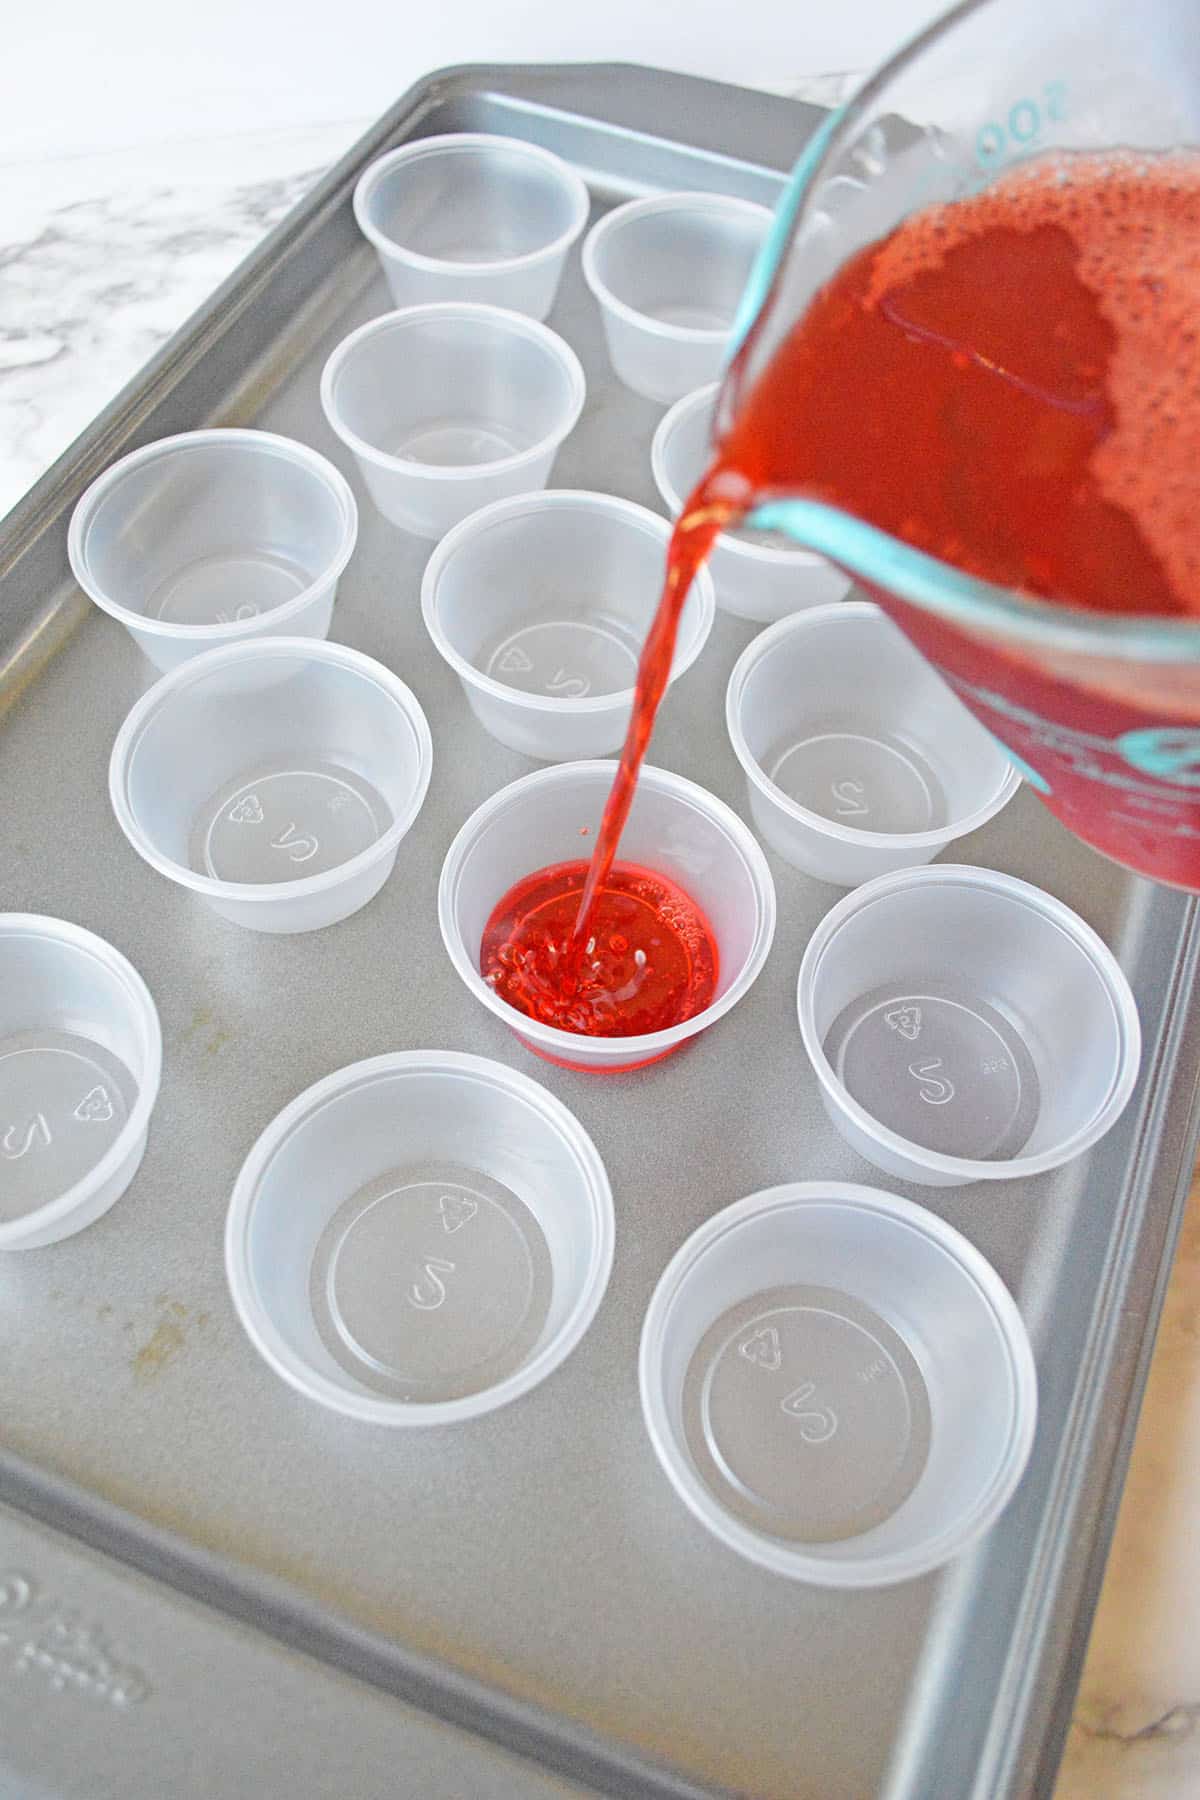 Small cups and mixture of Jello shot in red liquid color